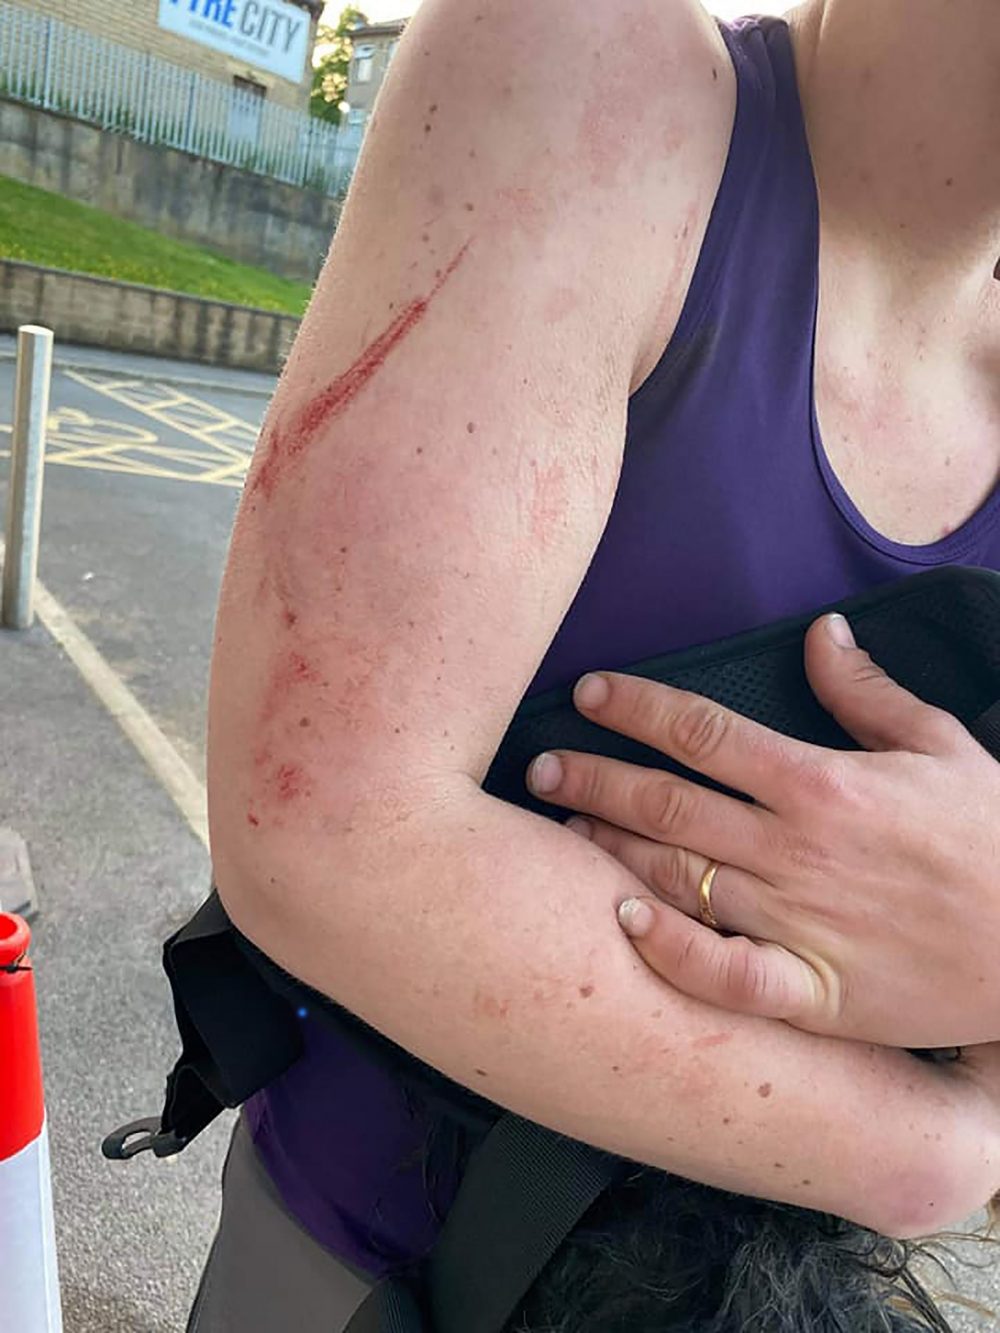 The scratches Marie got from the Mastiff's while trying to save her dog - Animal News UK